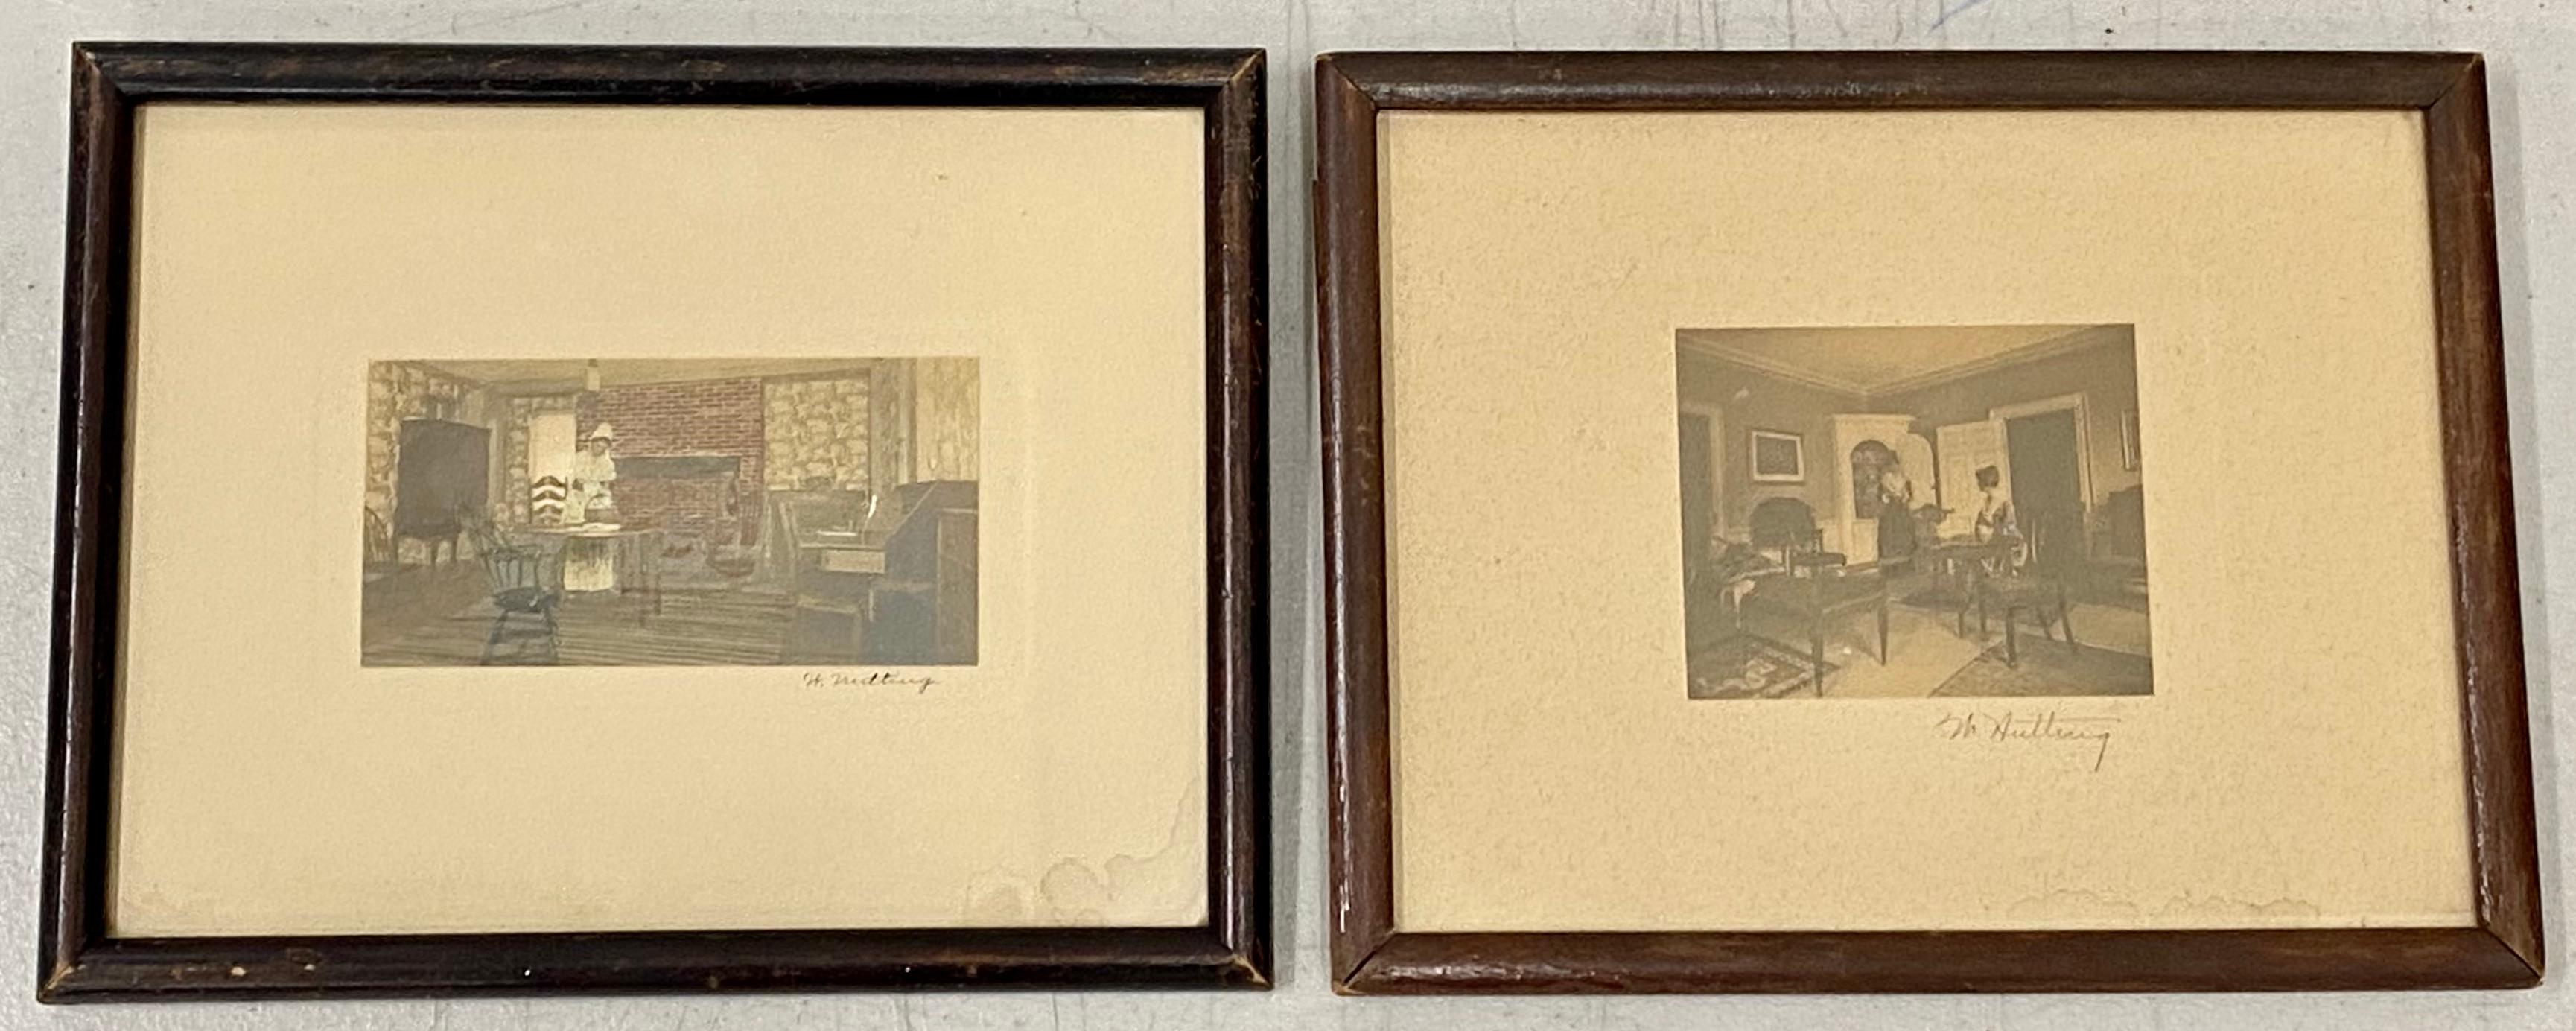 Early 20th C. Hand Tinted Interior Scene Photographs by Wallace Nutting c.1910